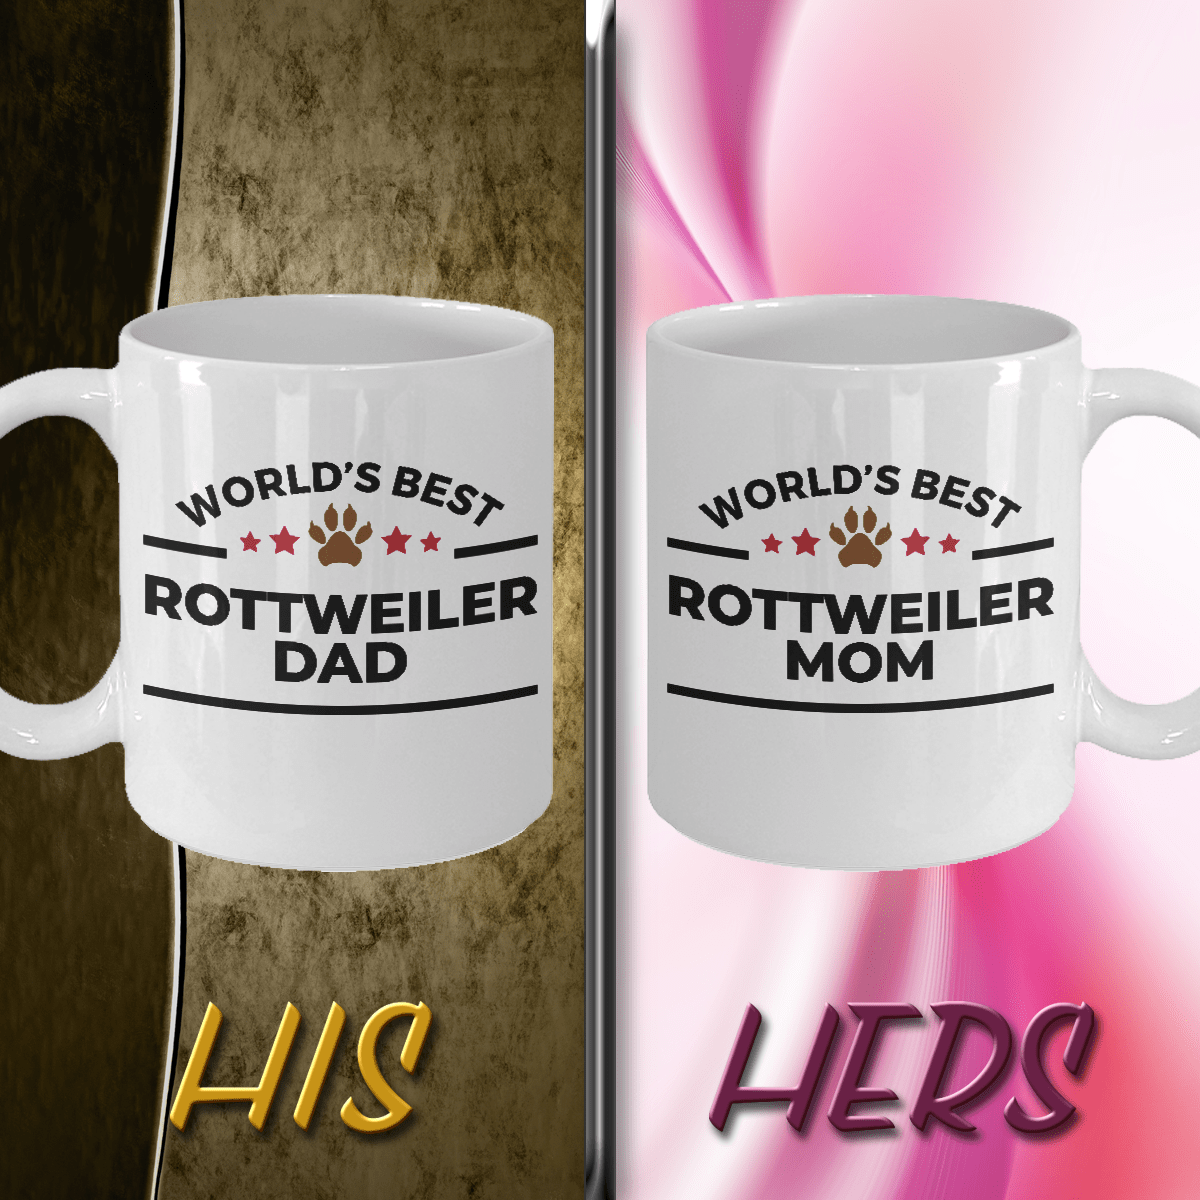 Rottweiler Dad and Mom Ceramic Mugs - Set of 2 - His and Hers